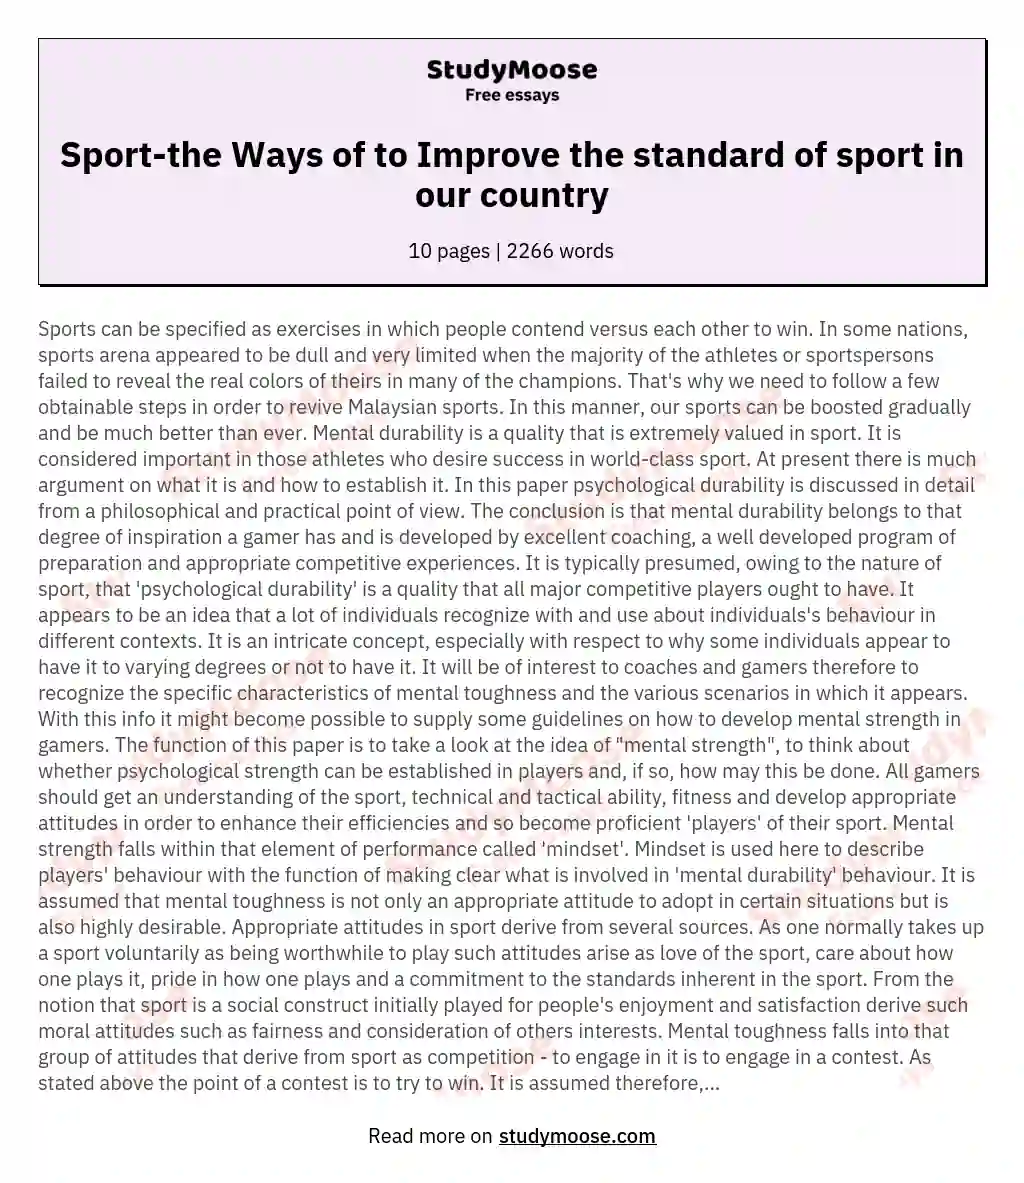 Sport-the Ways of to Improve the standard of sport in our country